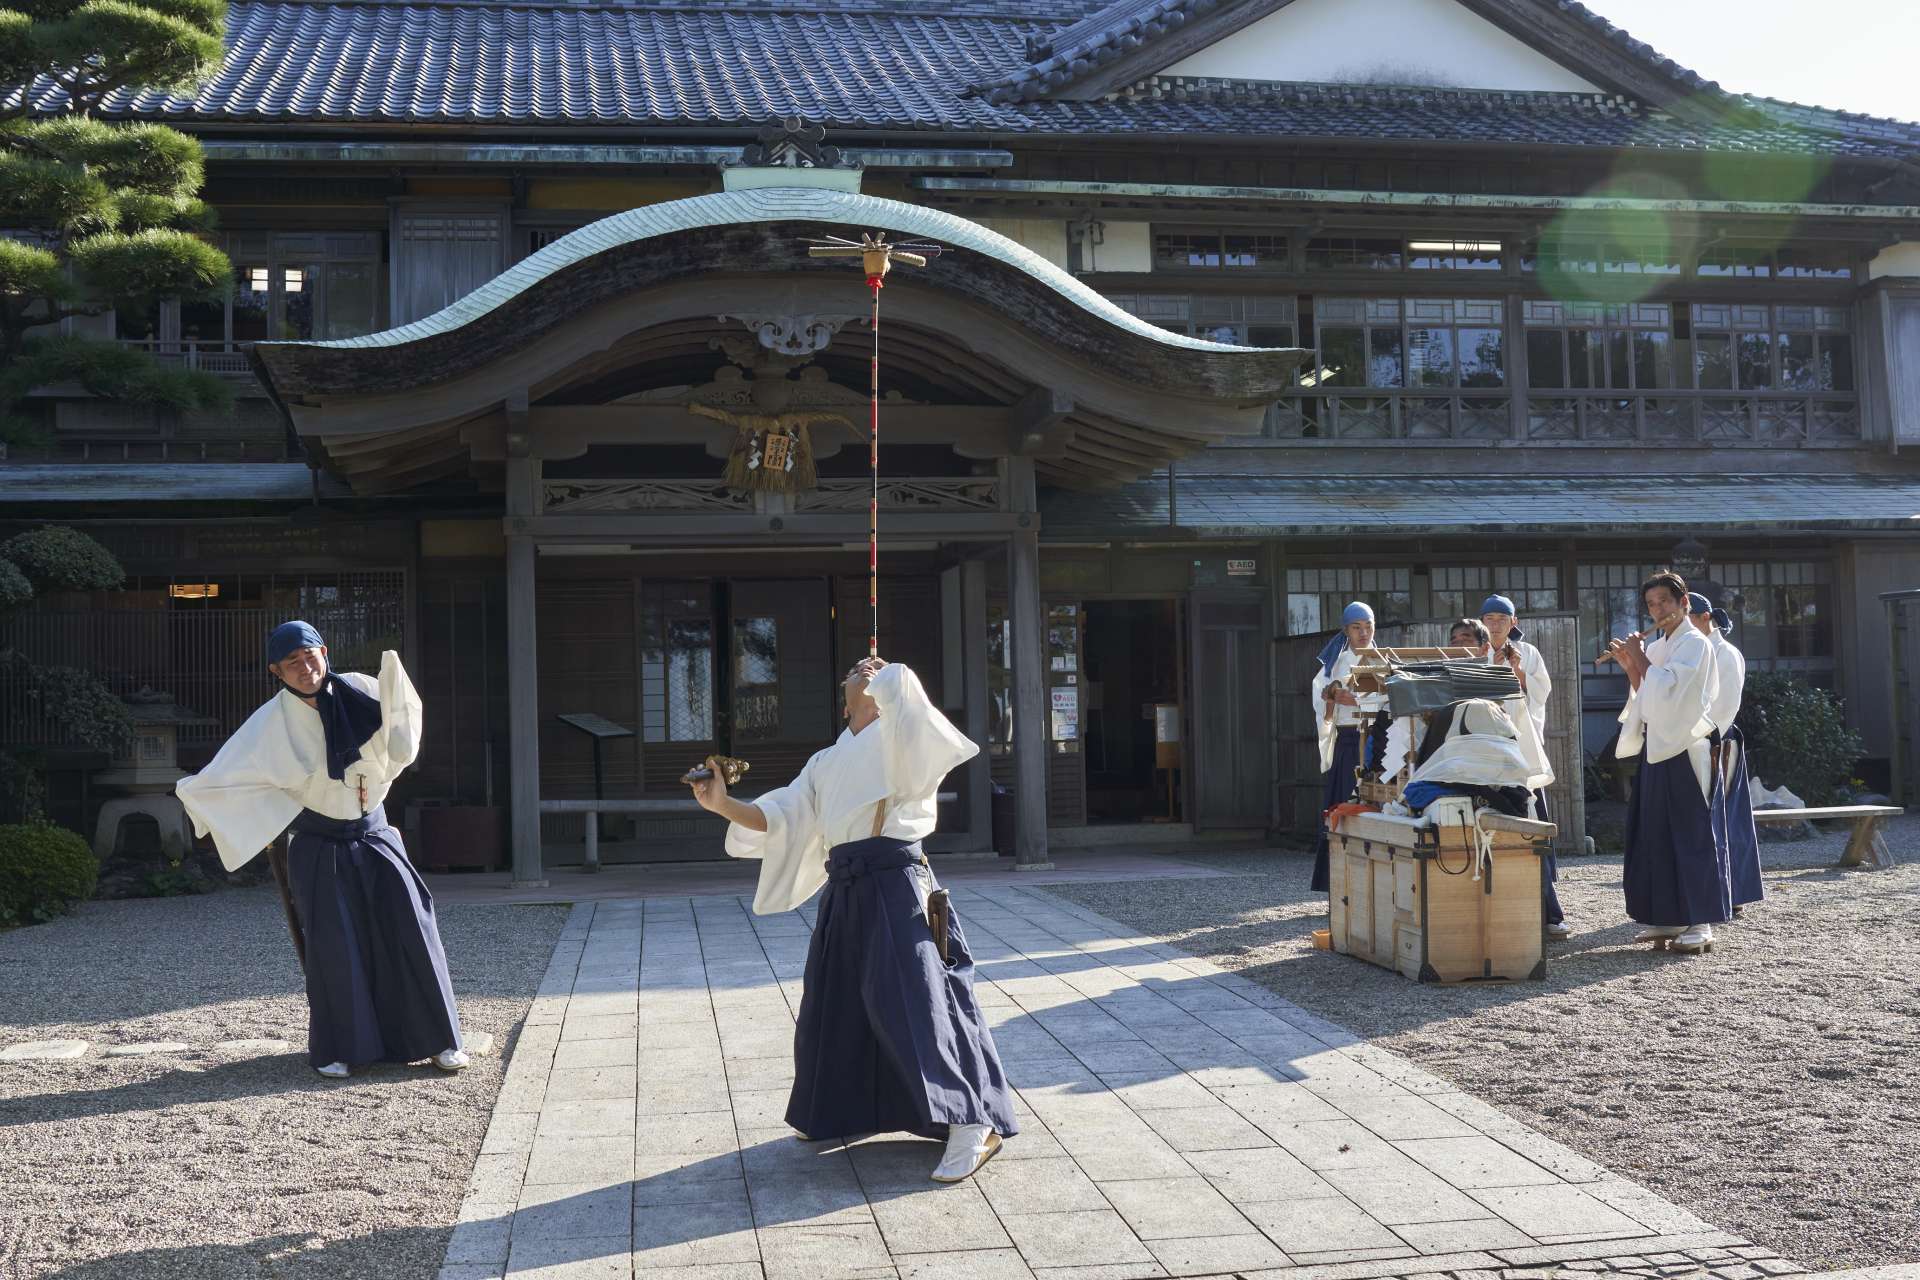 The eye-catching, traditional performance hailing from Ise Grand Shrine and shared across Japan via the Ise-daikagura troupe performances.